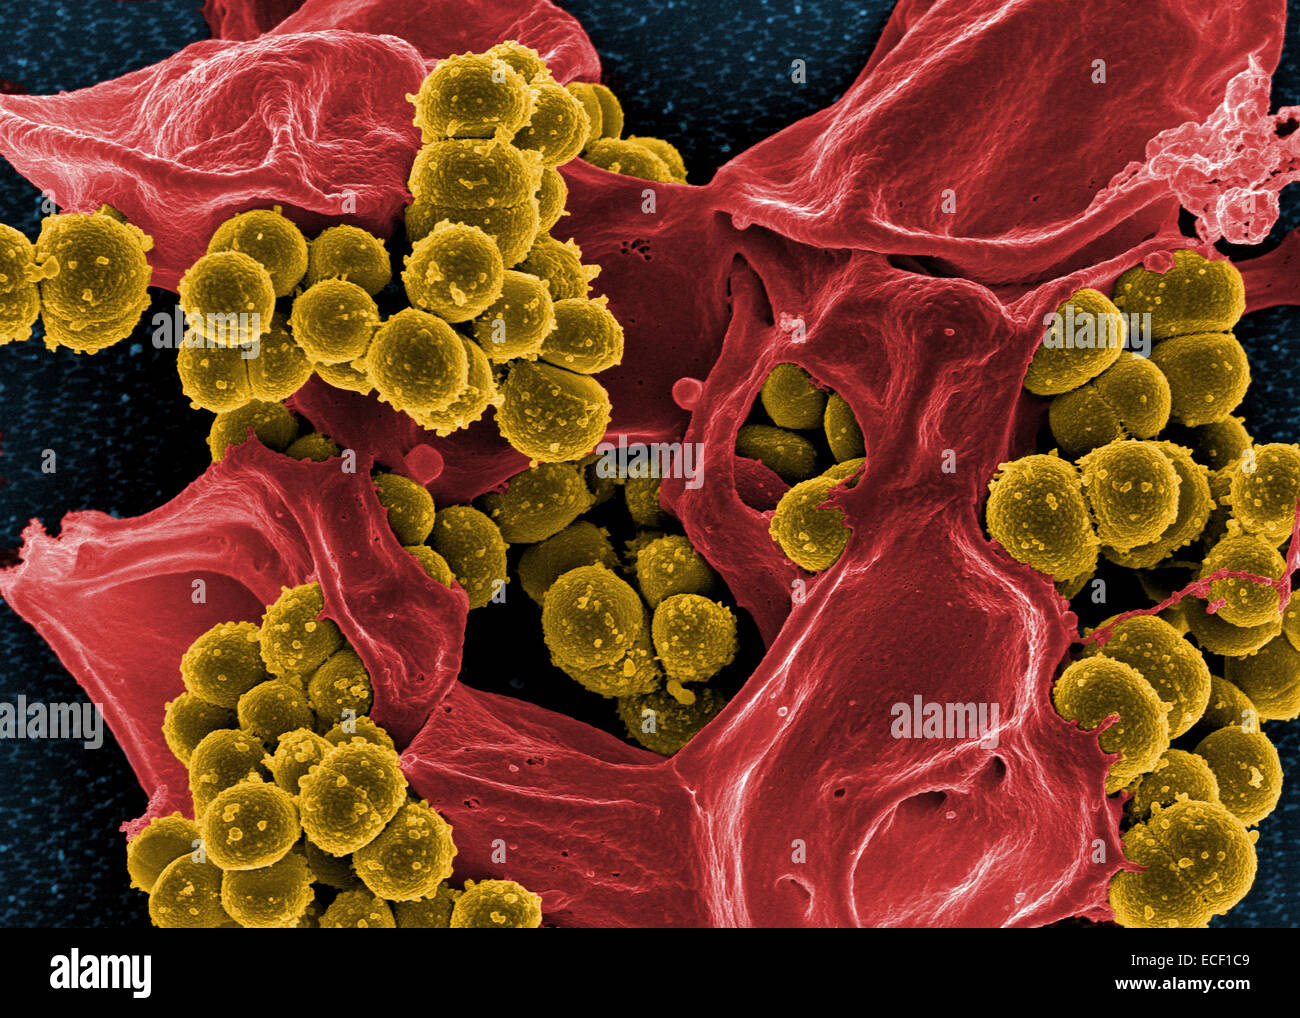 Scanning electron micrograph of methicillin-resistant Staphylococcus aureus and a dead human neutrophil. Stock Photo